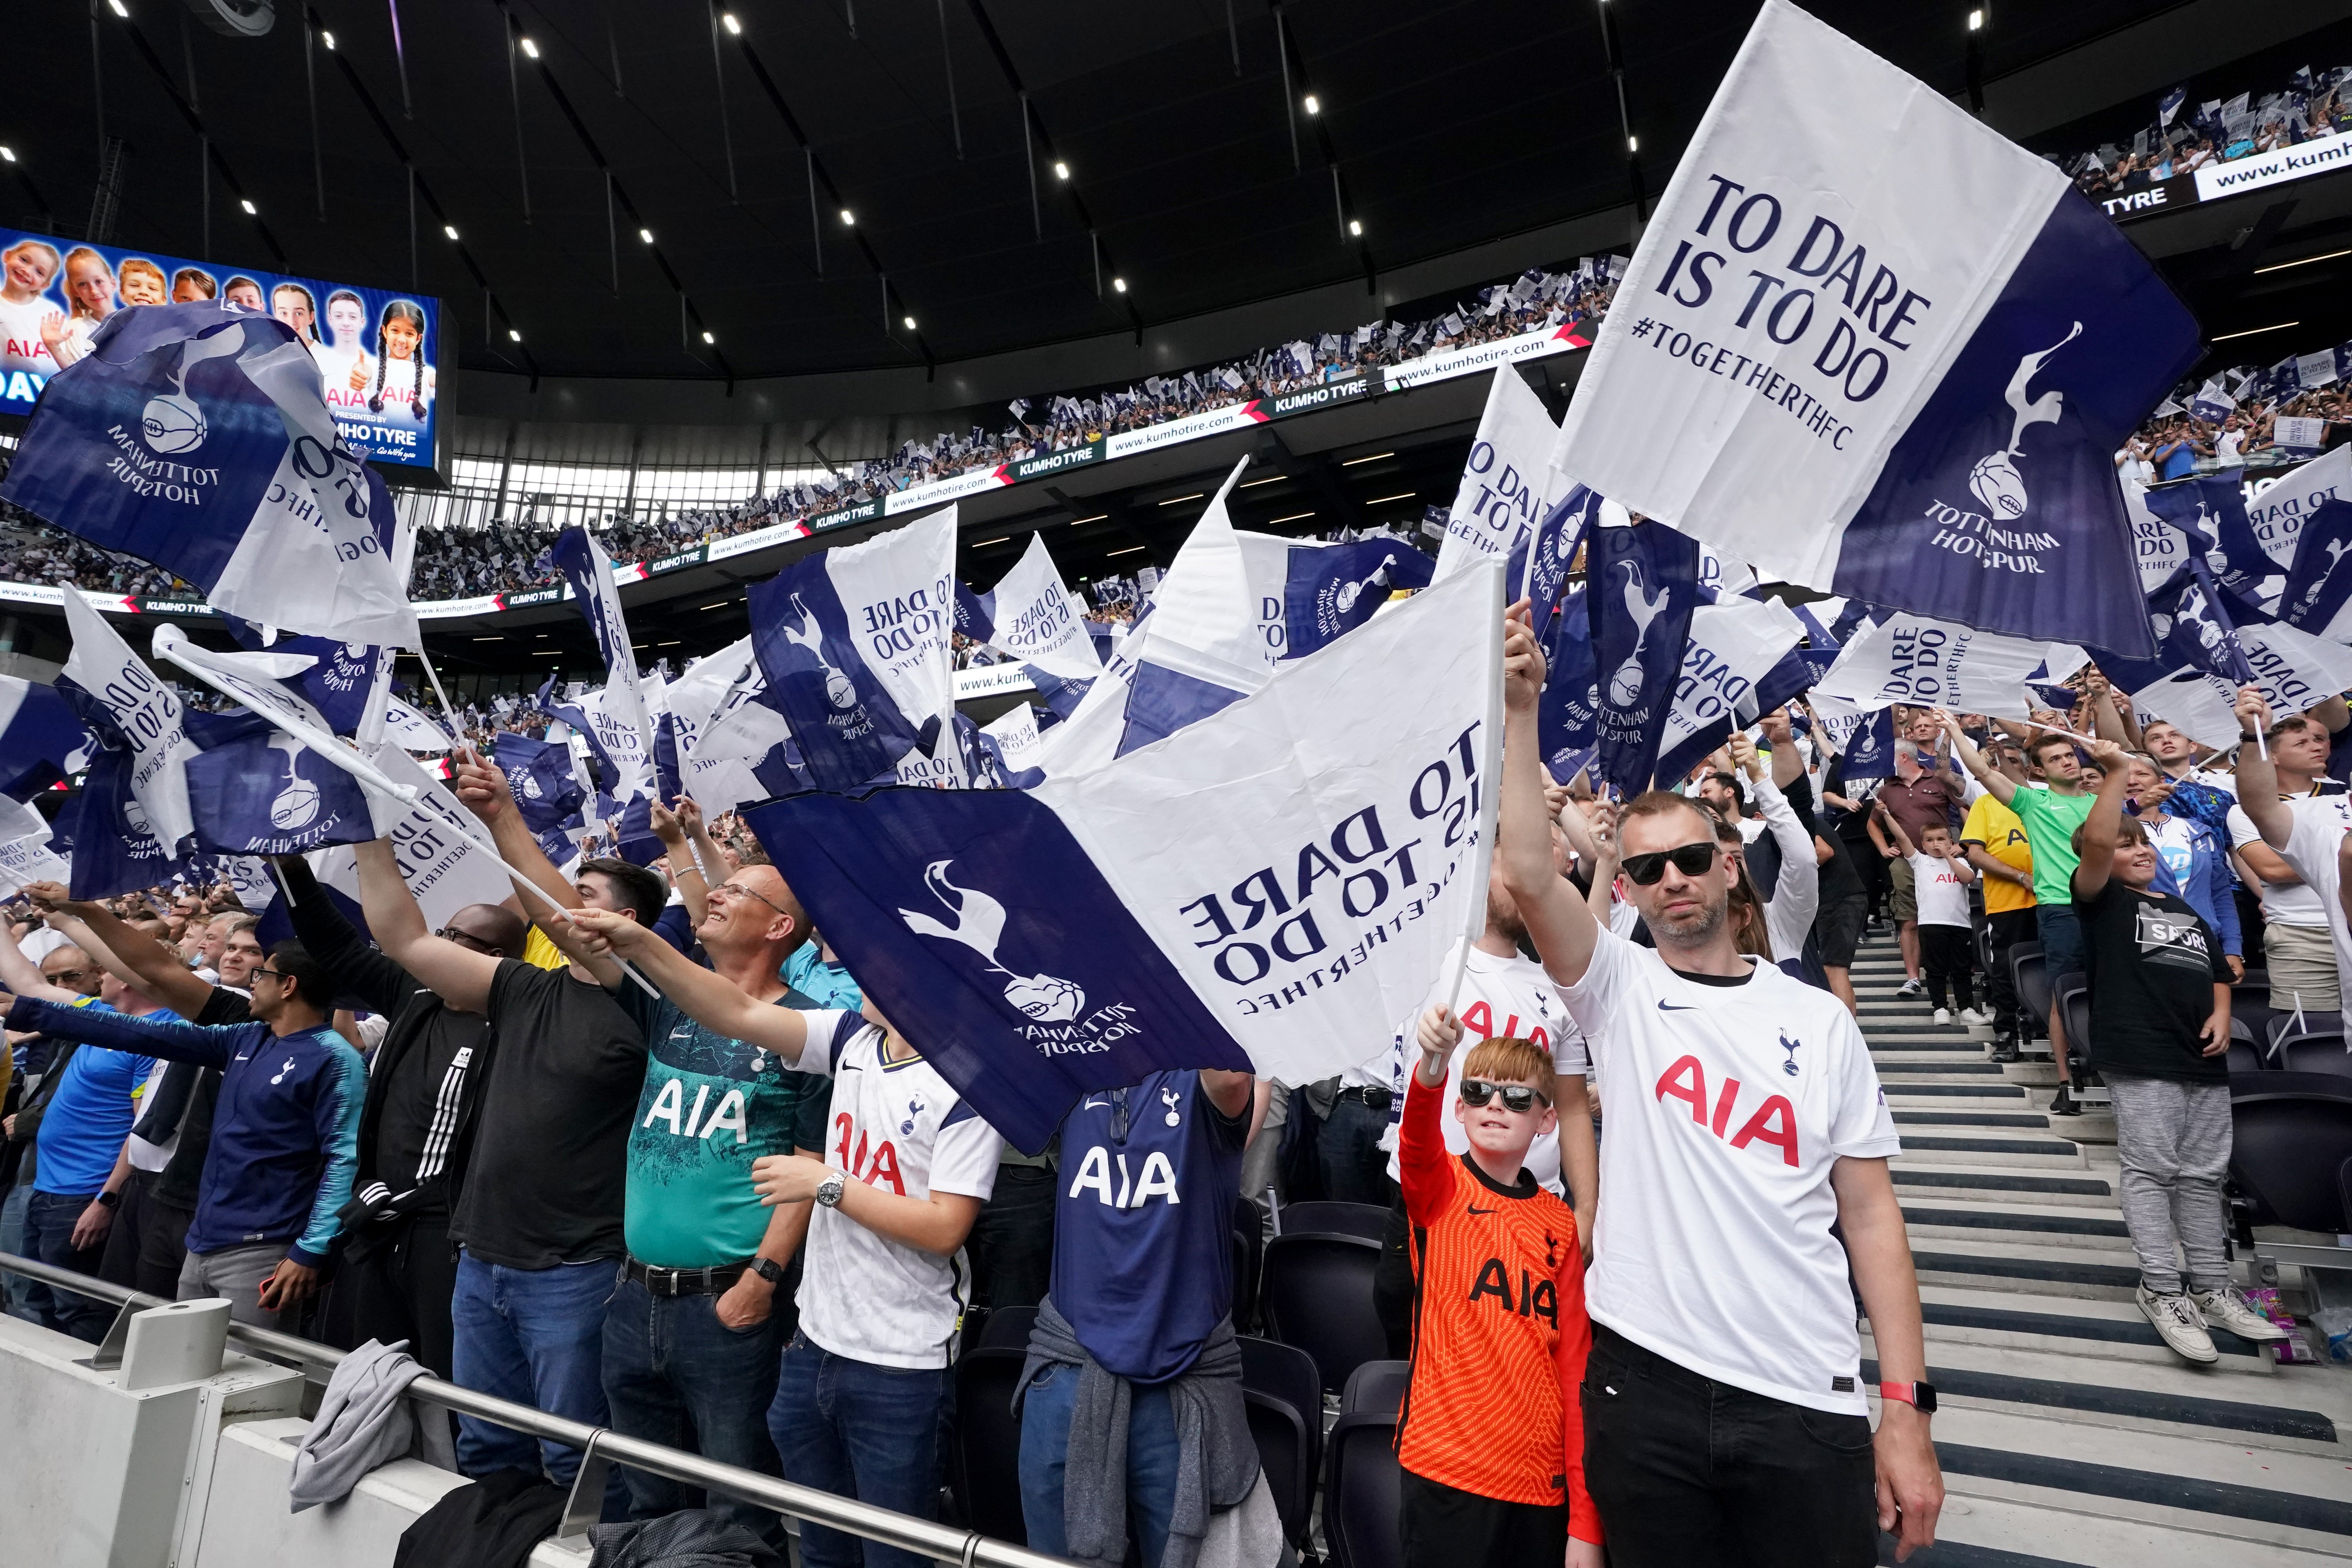 Tottenham Hotspur Supporters’ Trust asked the club for a meeting (Nick Potts/PA)